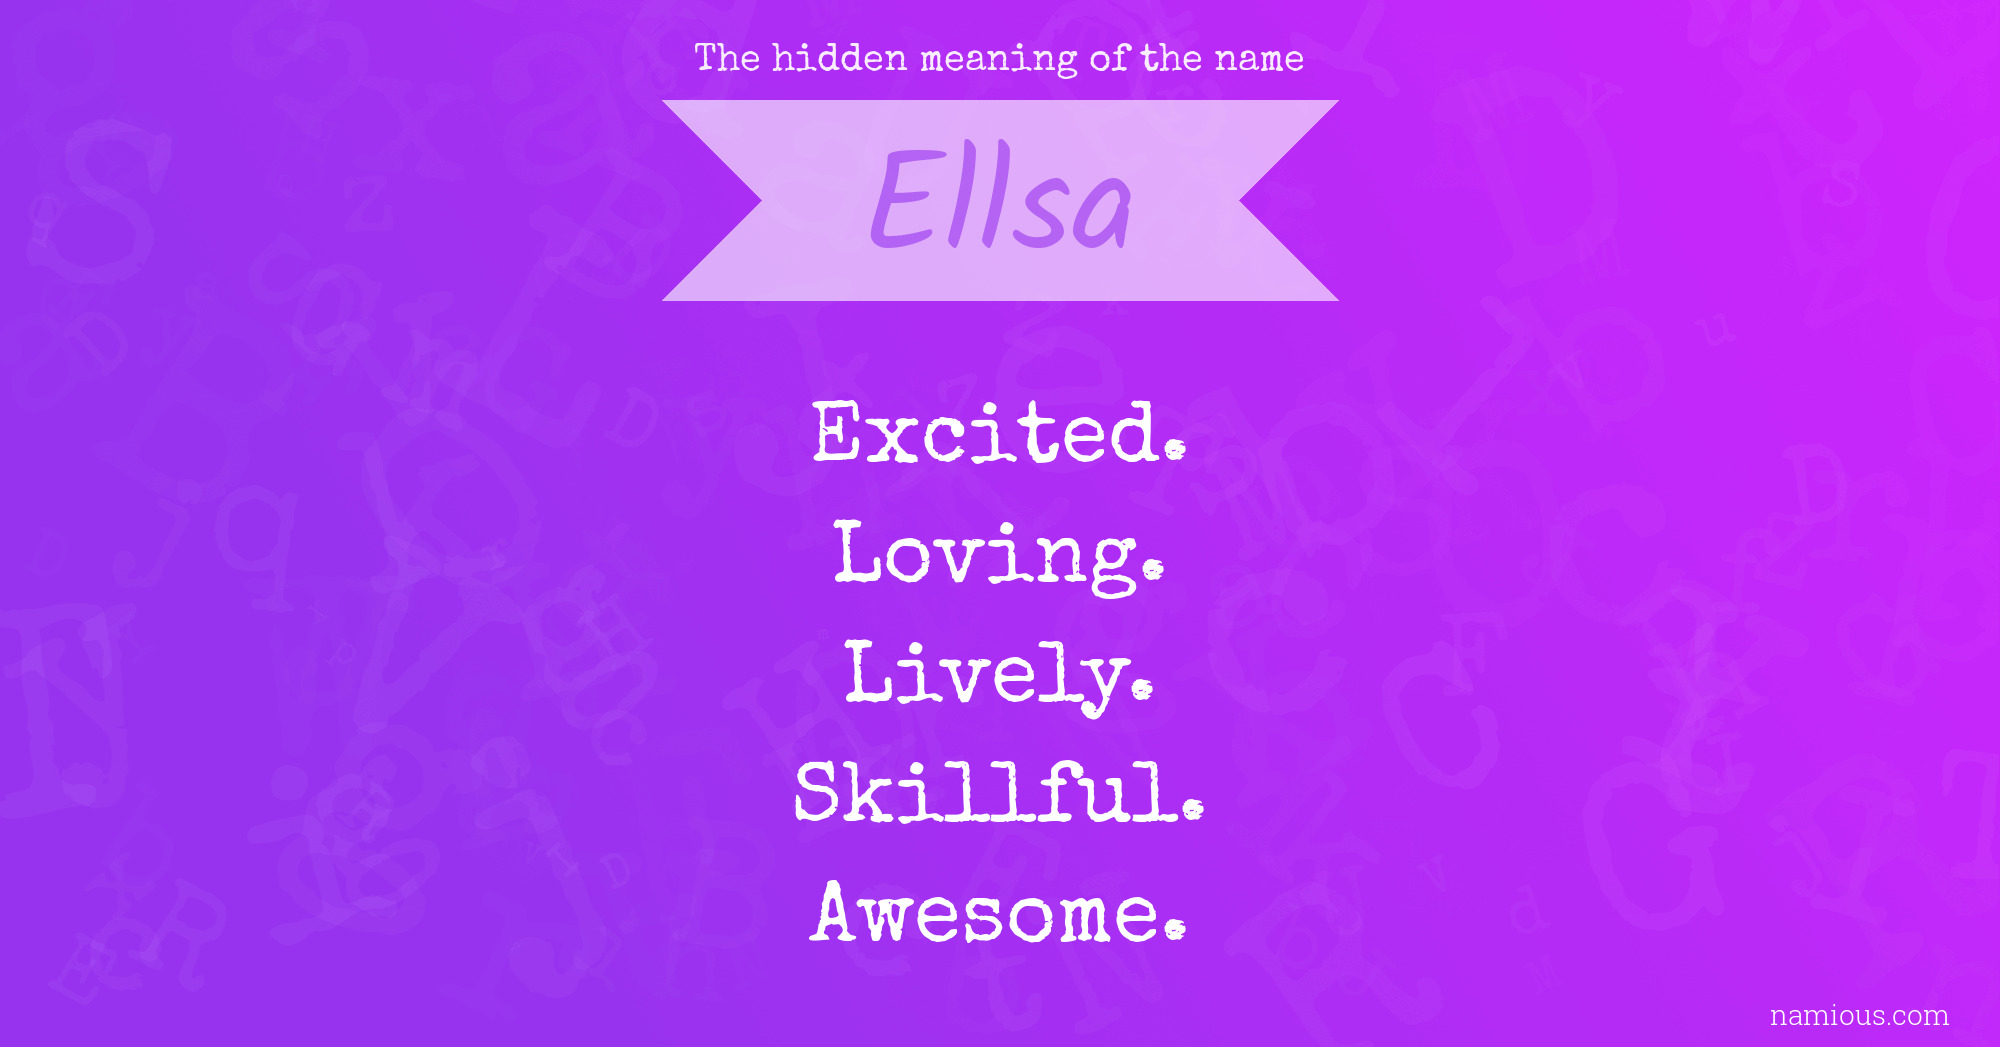 The hidden meaning of the name Ellsa